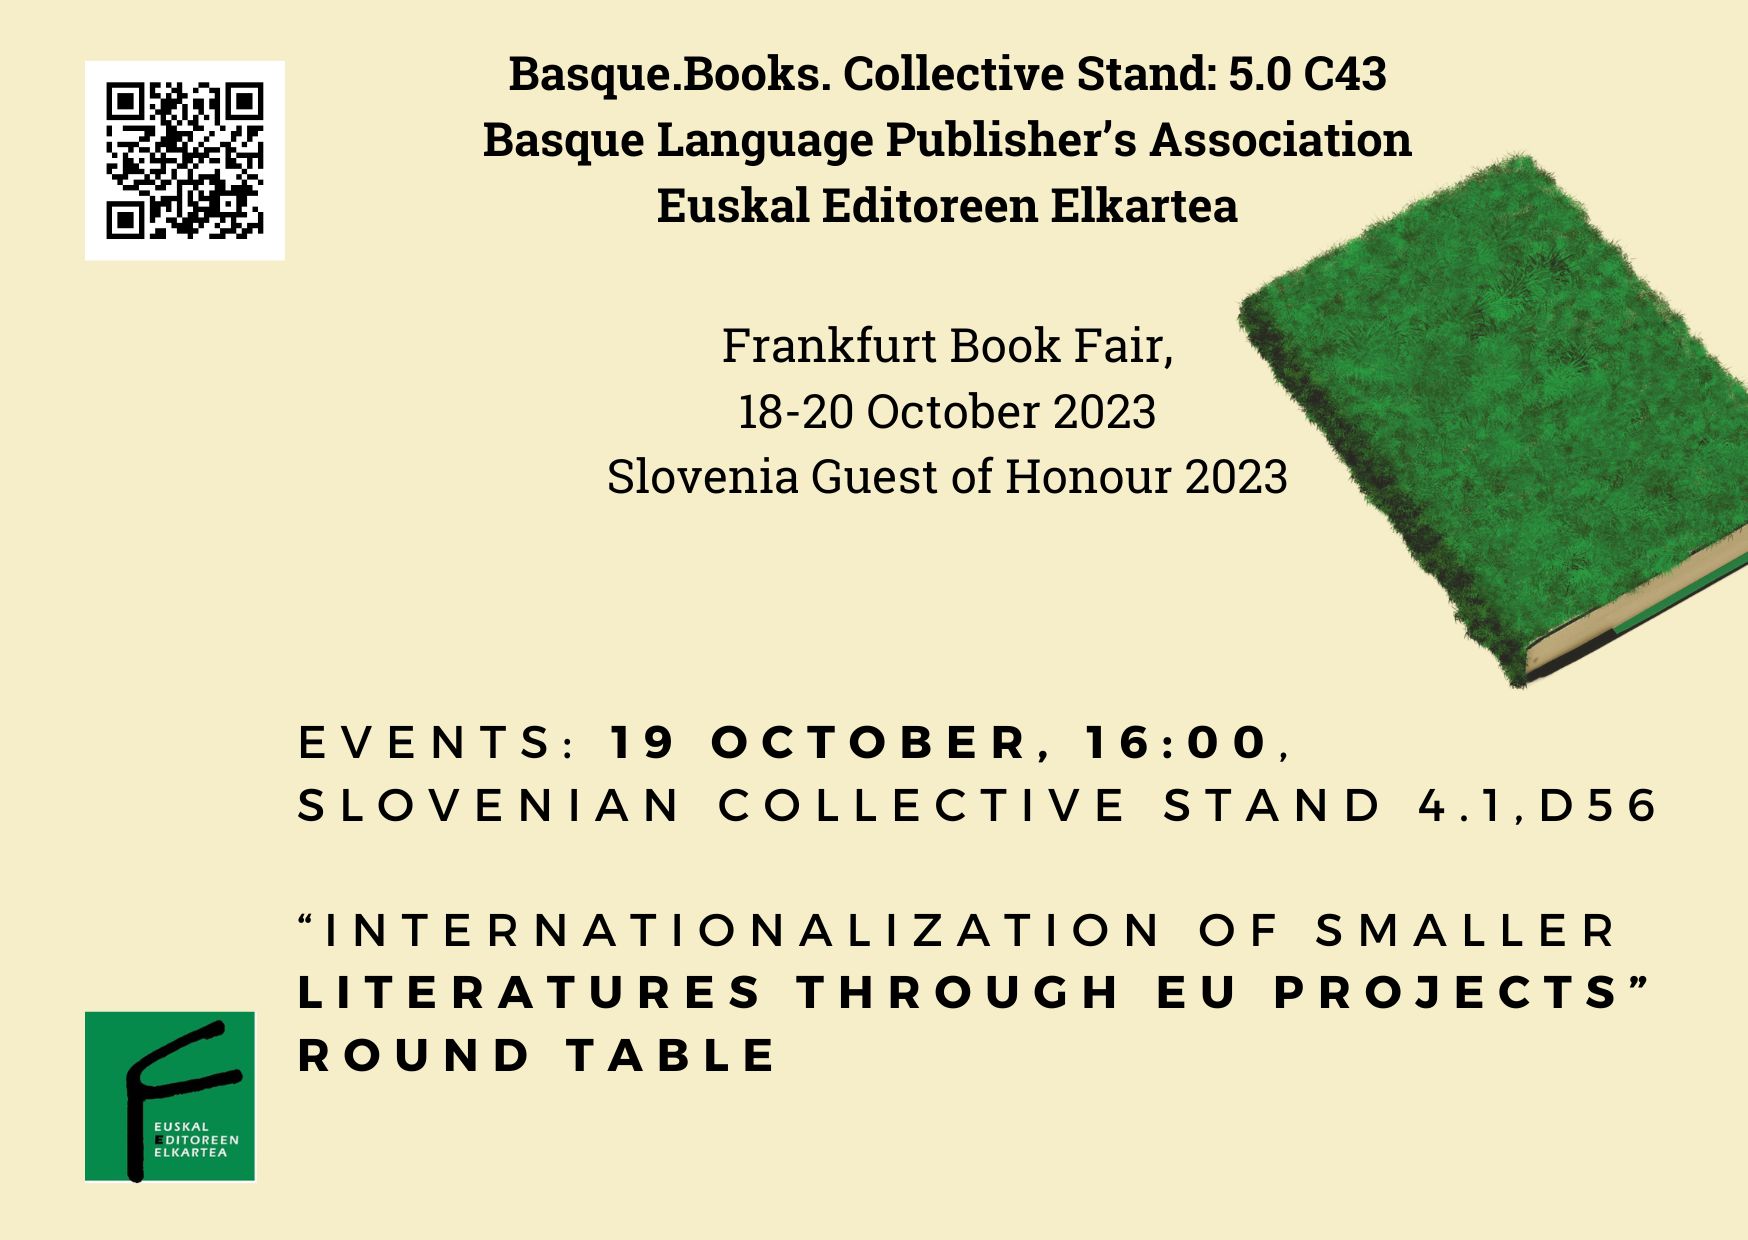 Euskal Editoreen Elkartea will be present at the Frankfurt Book Fair and will participate in a round table at the Slovenian stand